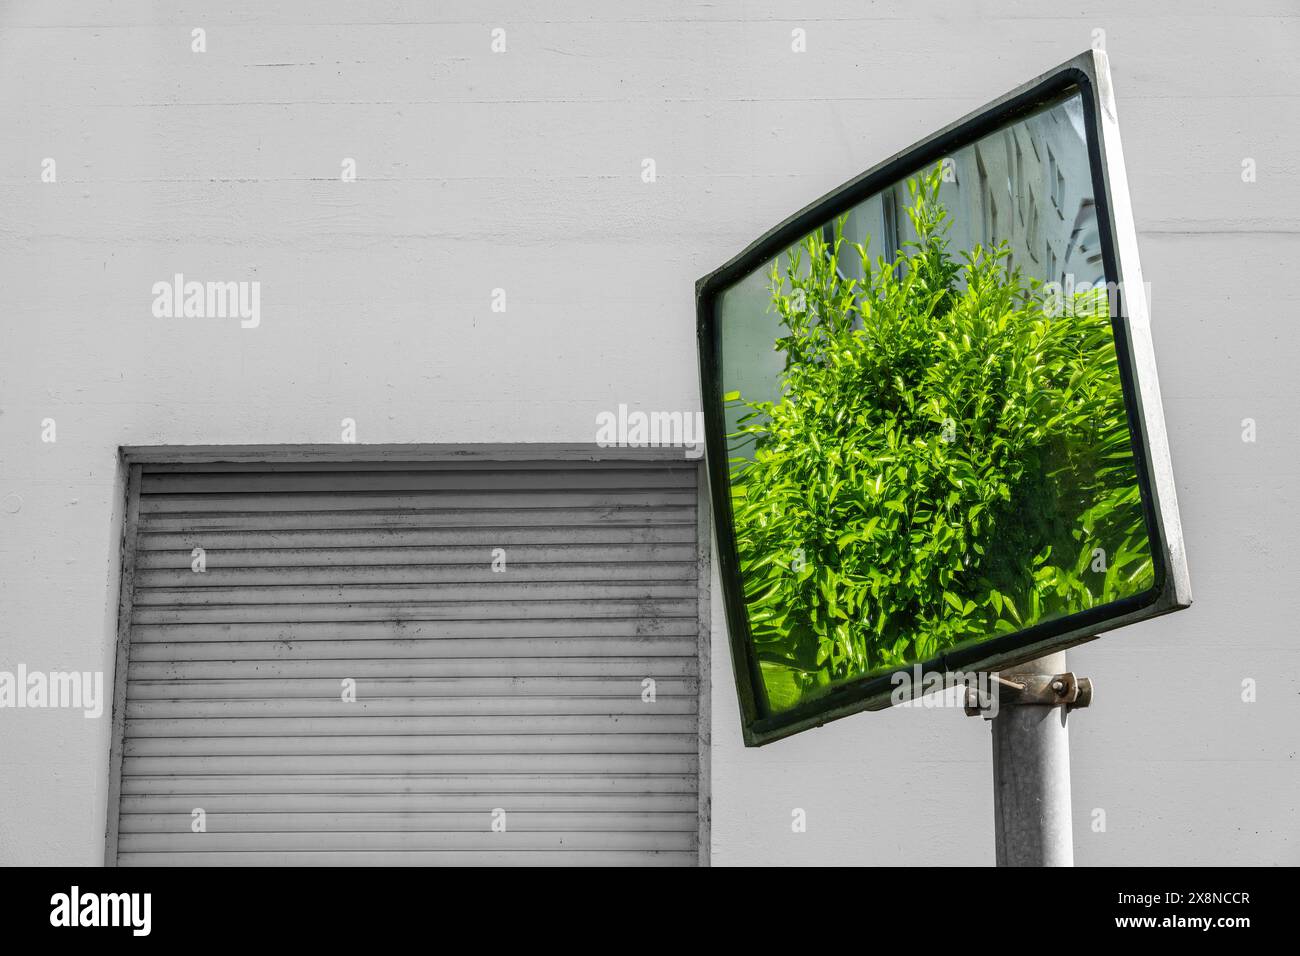 Square traffic mirror reflecting lush green bush, against a white wall with closed roll-down shutter. Stock Photo